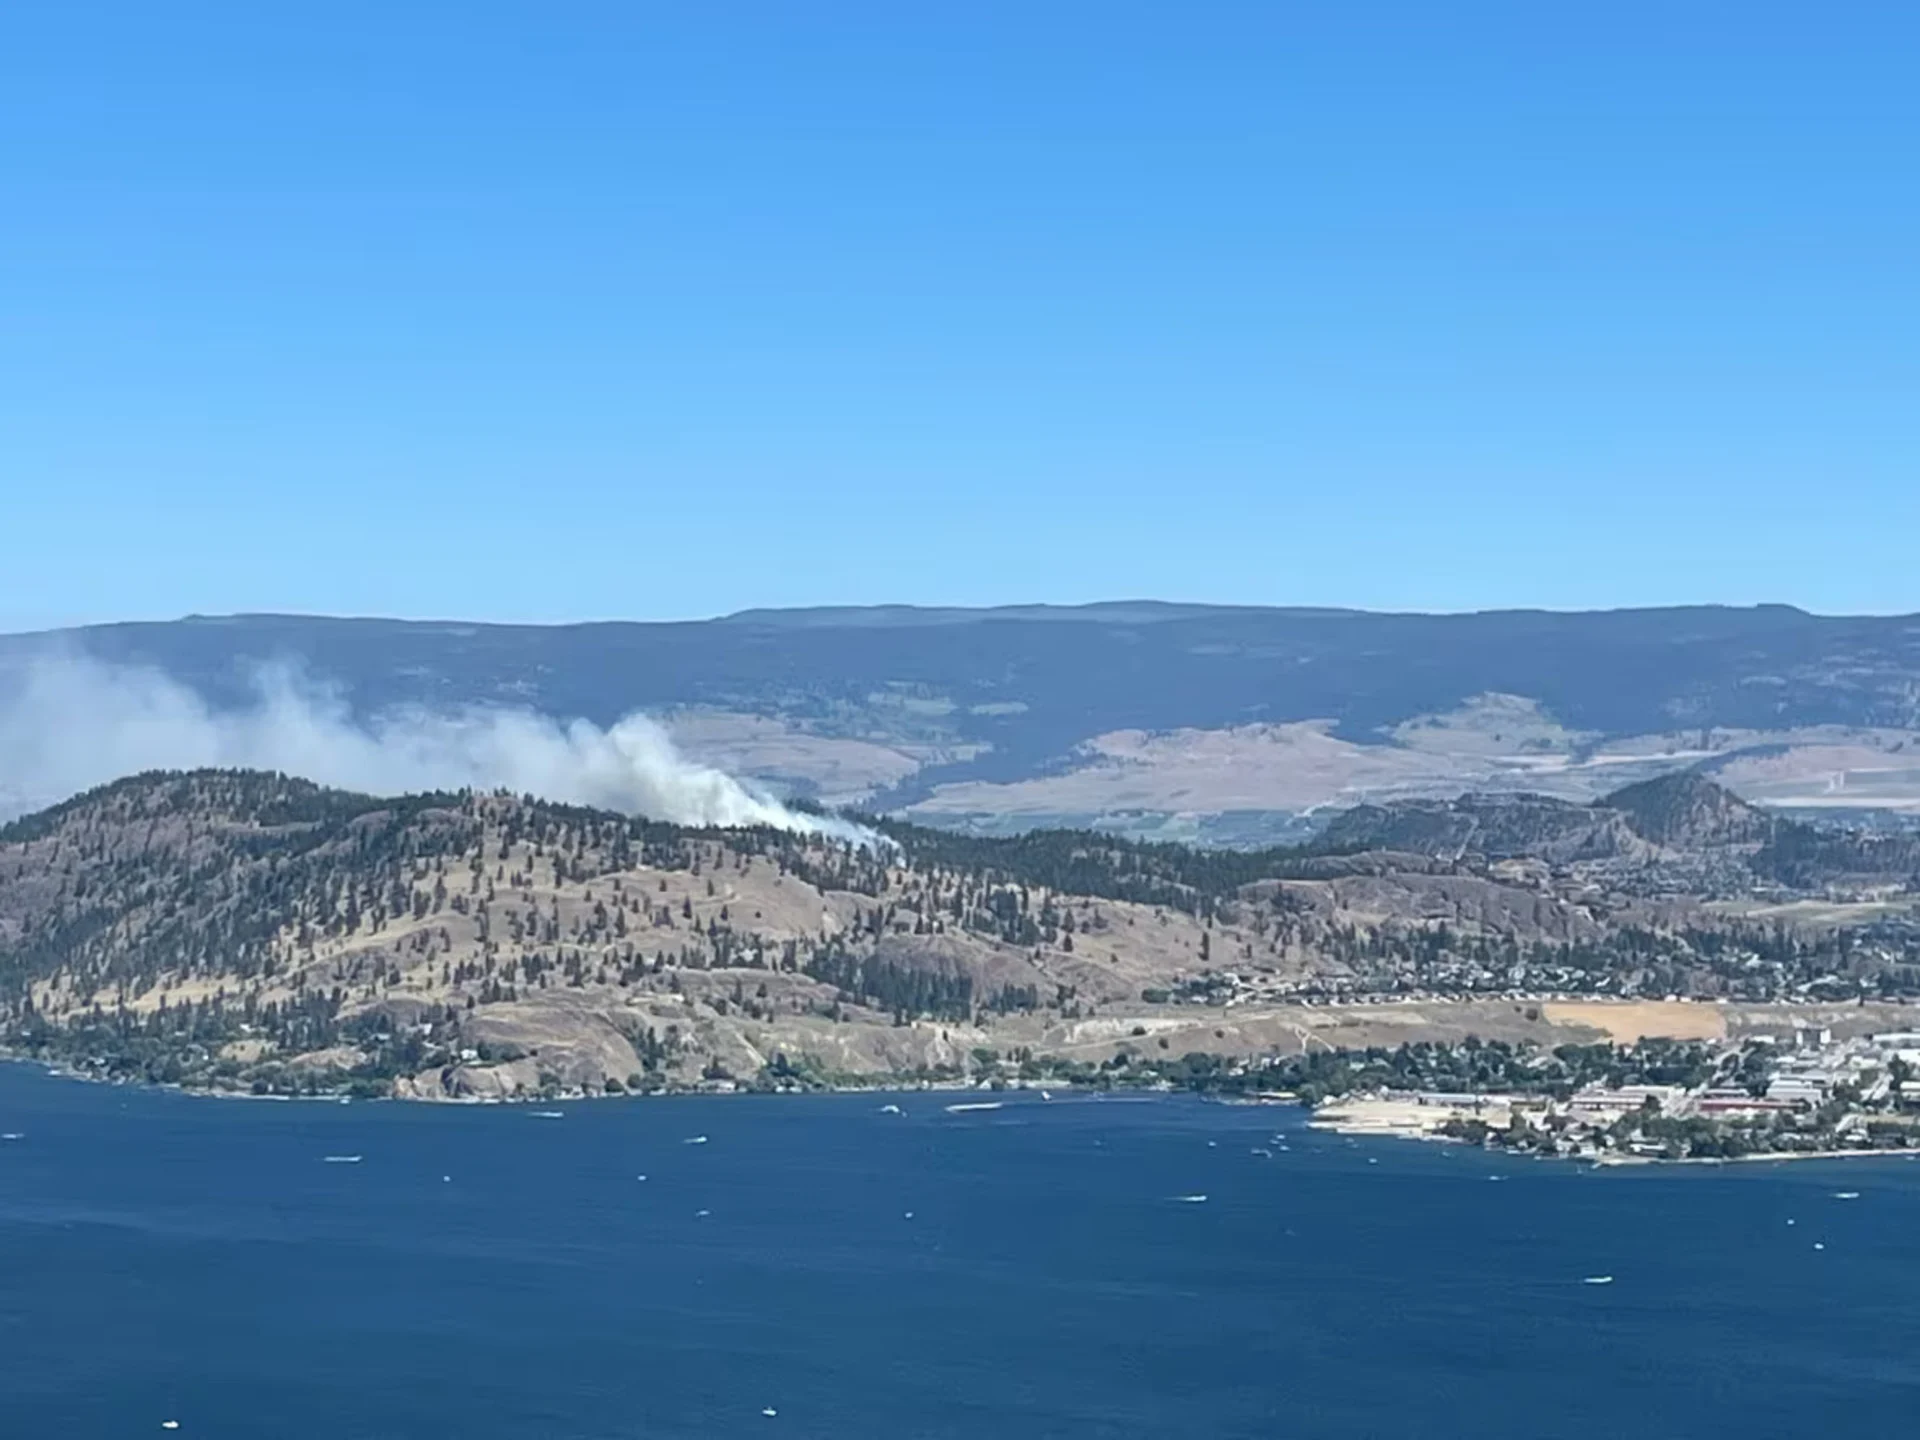 Wildfire under control in Kelowna, B.C., but evacuation alerts remain in effect